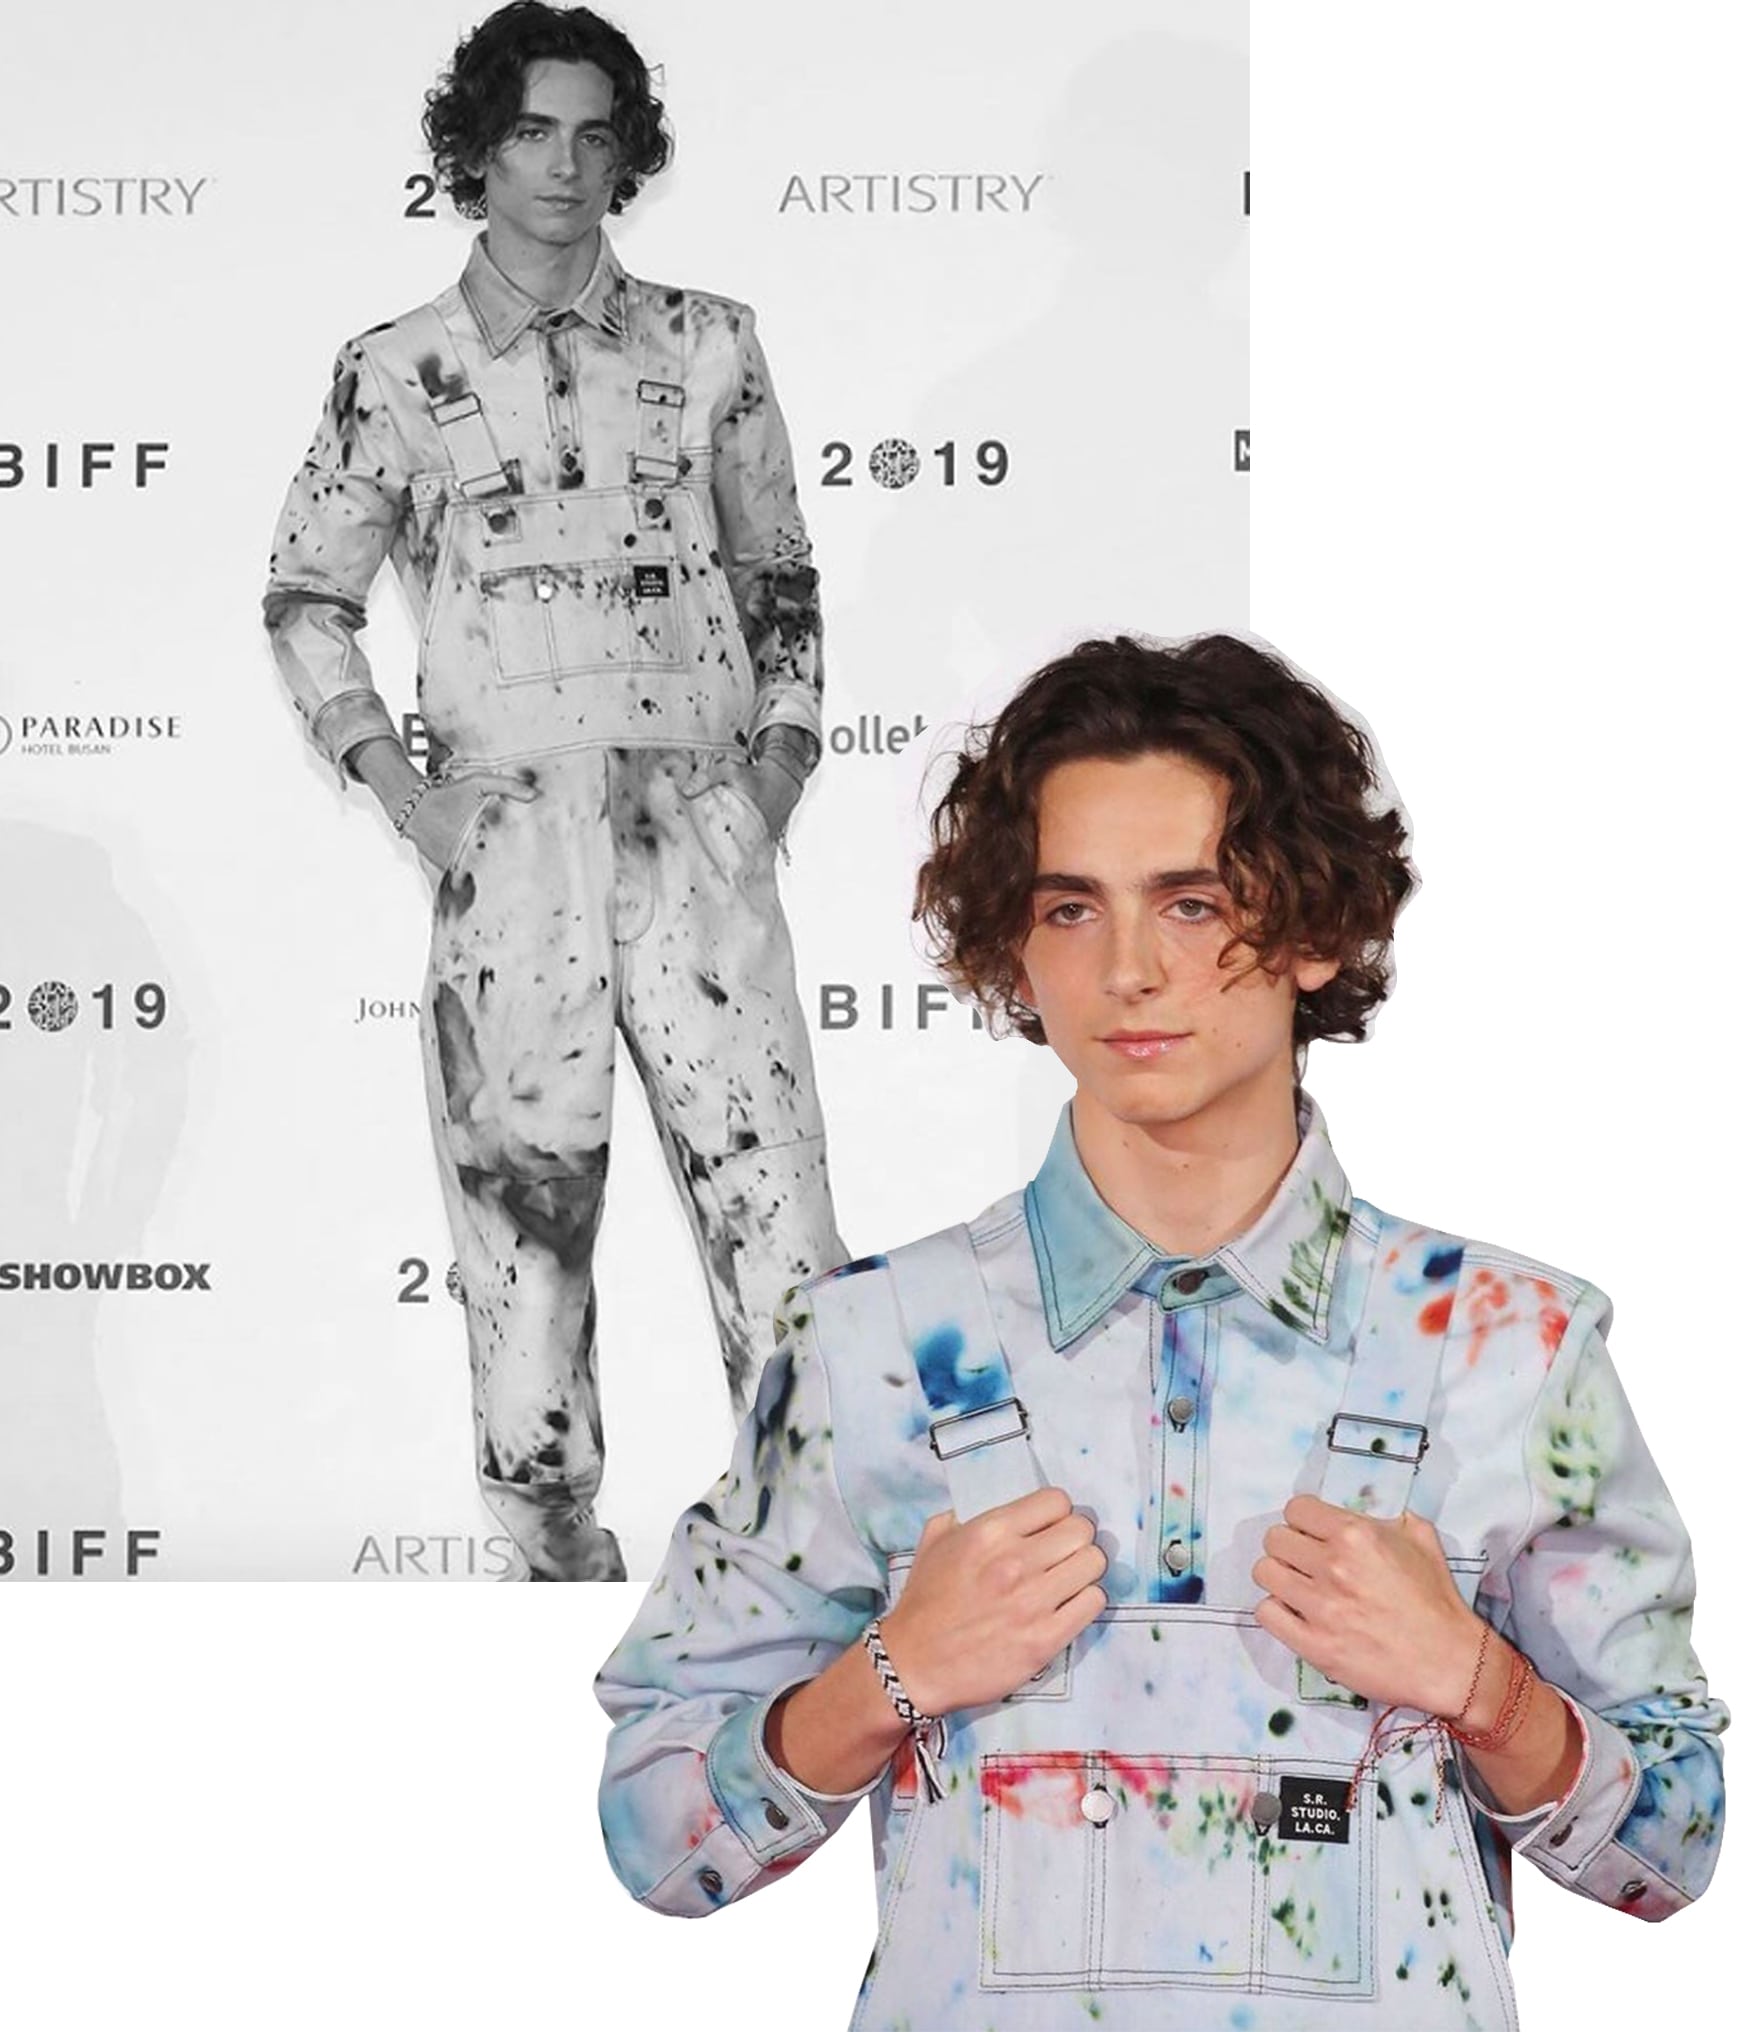 Timothée Chalamet's red carpet looks for 'The King': a discussion - RUSSH